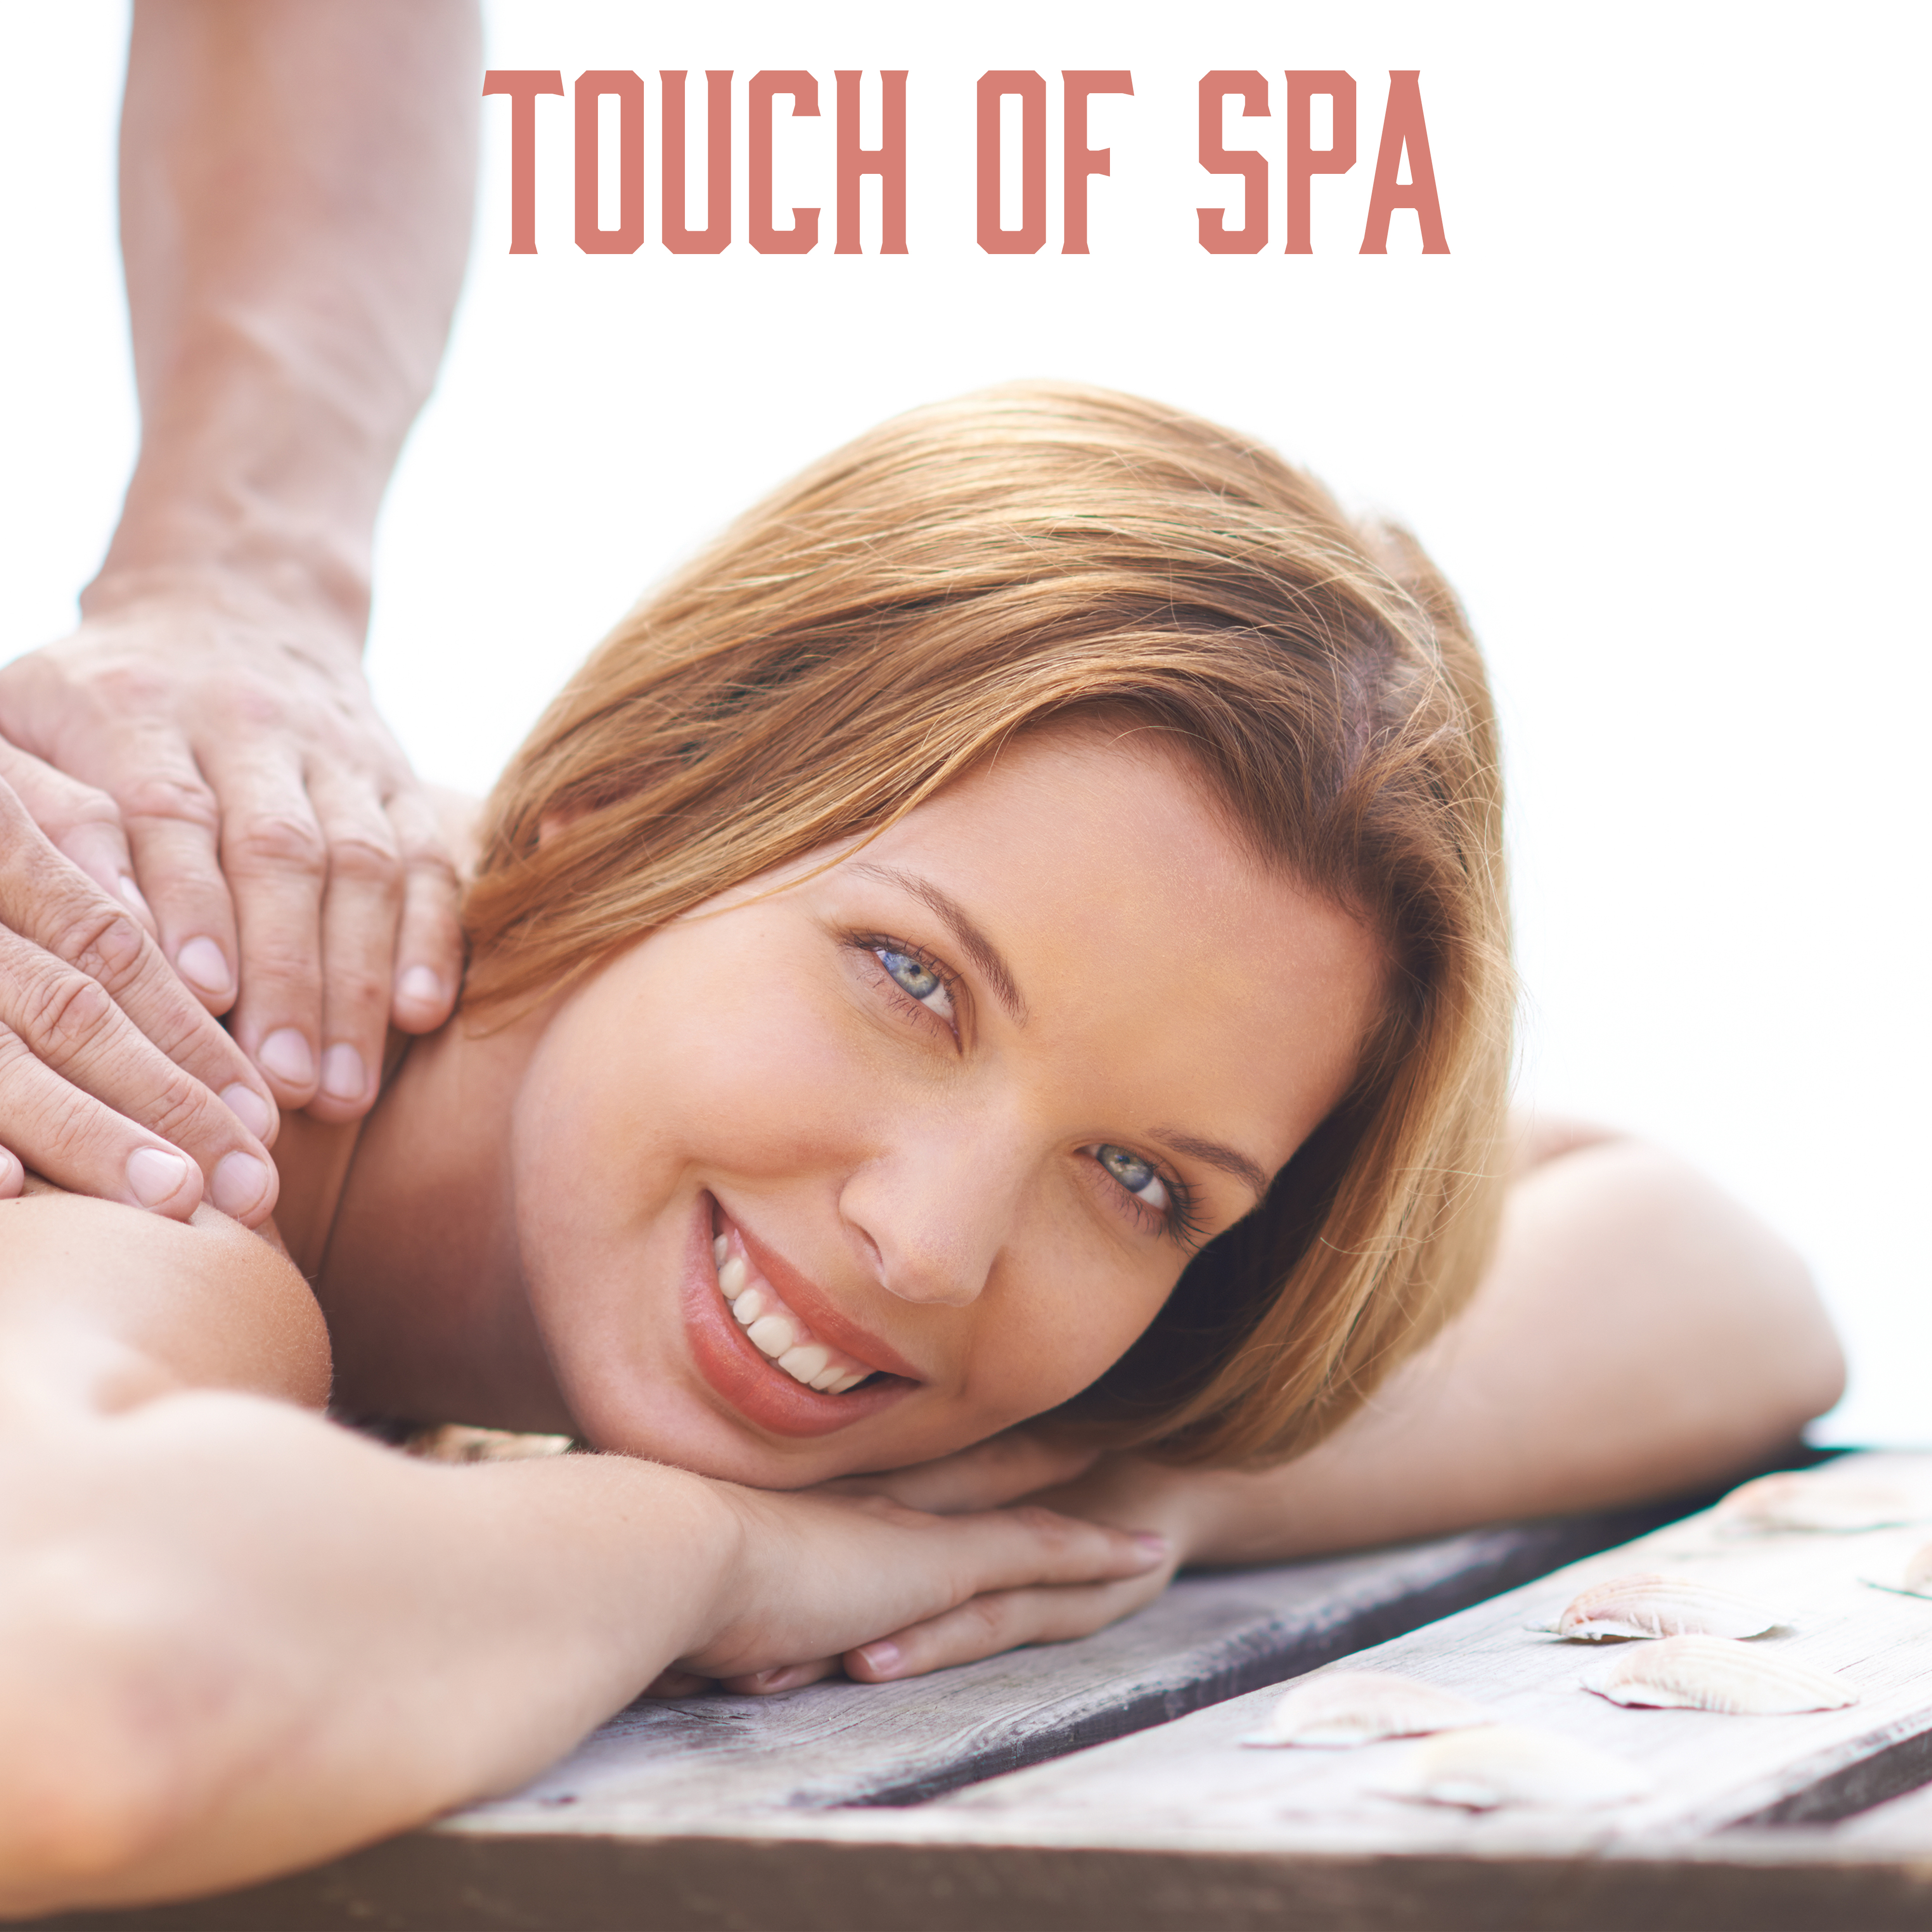 Touch of Spa  Pure Sounds of Nature for Spa, Deep Relax Music, Background Music for Massage, Spa Lounge